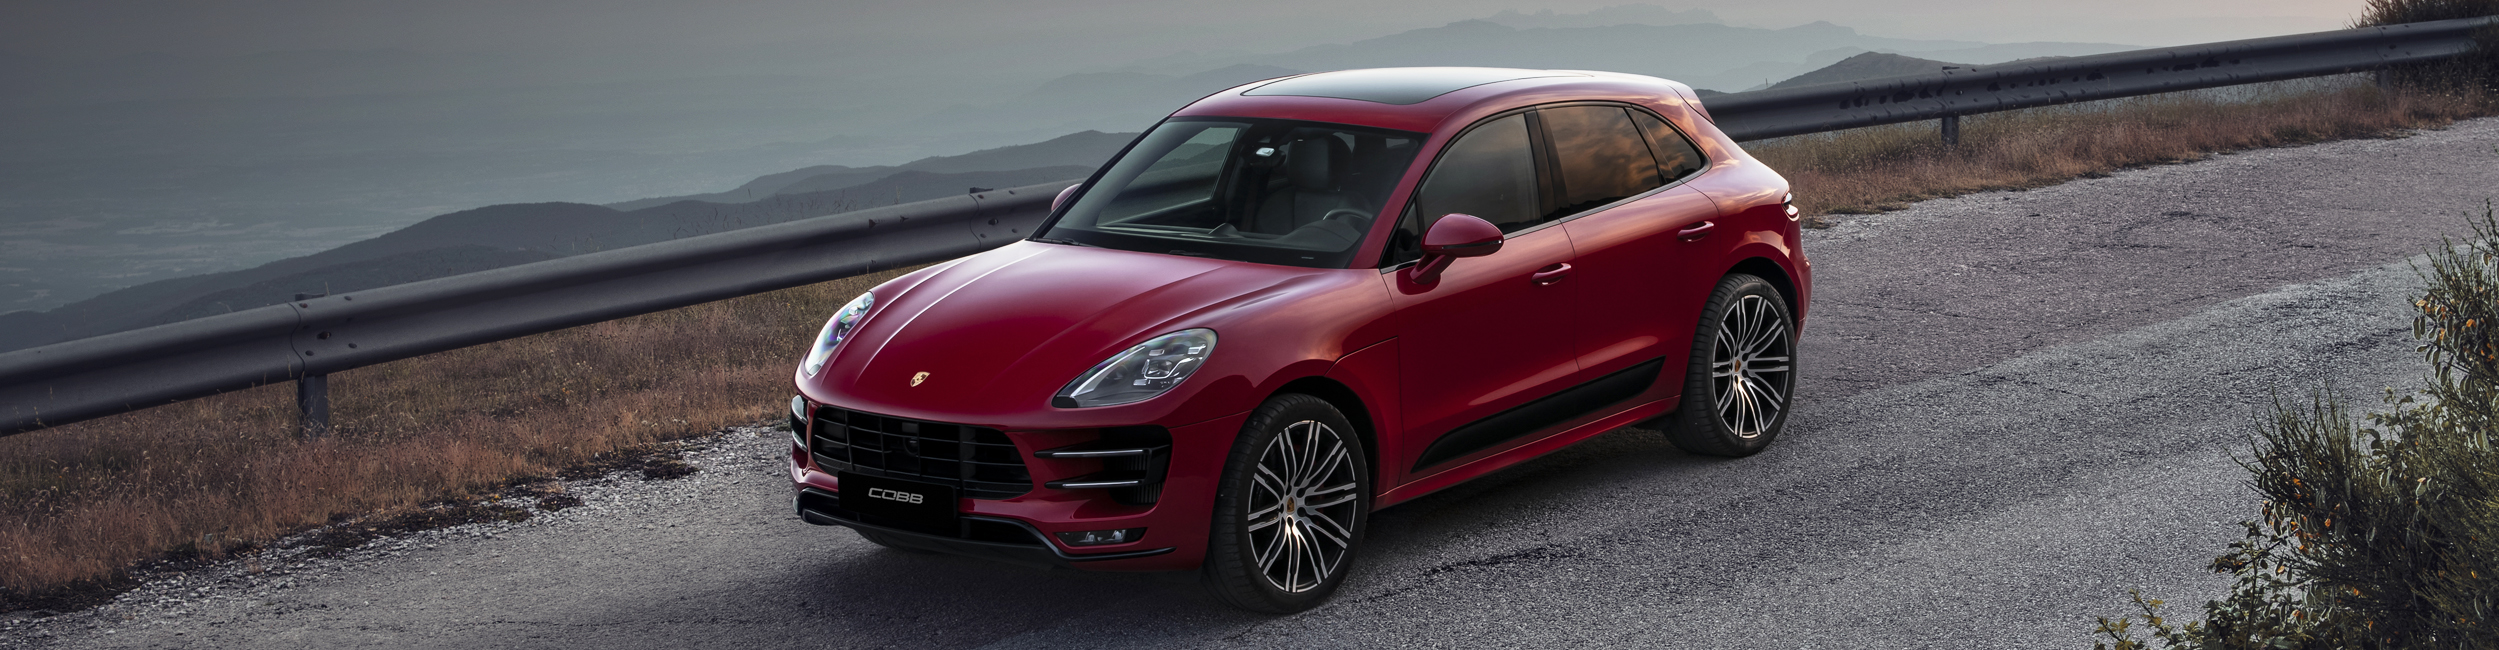 Porsche Macan Stage Packages